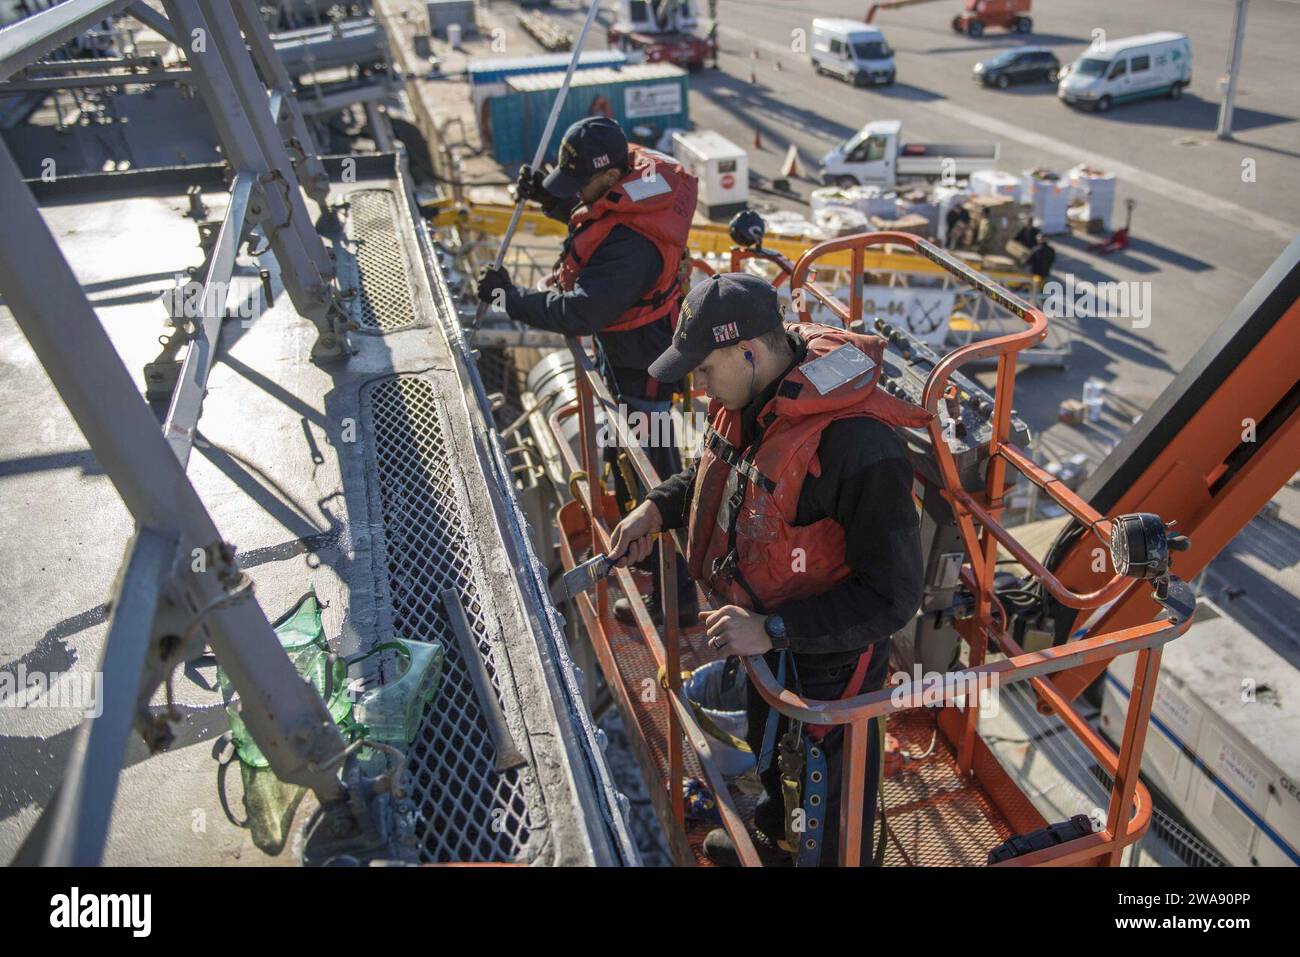 US military forces. NAVAL STATION ROTA, Spain (Feb. 08, 2018) Р Seaman Brinio Urena, left, and Gas Turbine System Technician Mechanical Fireman Kyle Ribble paint over the side of the Arleigh Burke-class guided-missile destroyer USS Carney (DDG 64), in Rota, Spain, Feb. 8, 2018. Carney, forward-deployed to Rota, Spain, is on its fourth patrol in the U.S. 6th Fleet area of operations in support of regional allies and partners, and U.S. national security interests in Europe. (U.S. Navy photo by Mass Communication Specialist 2nd Class James R. Turner/Released) Stock Photo